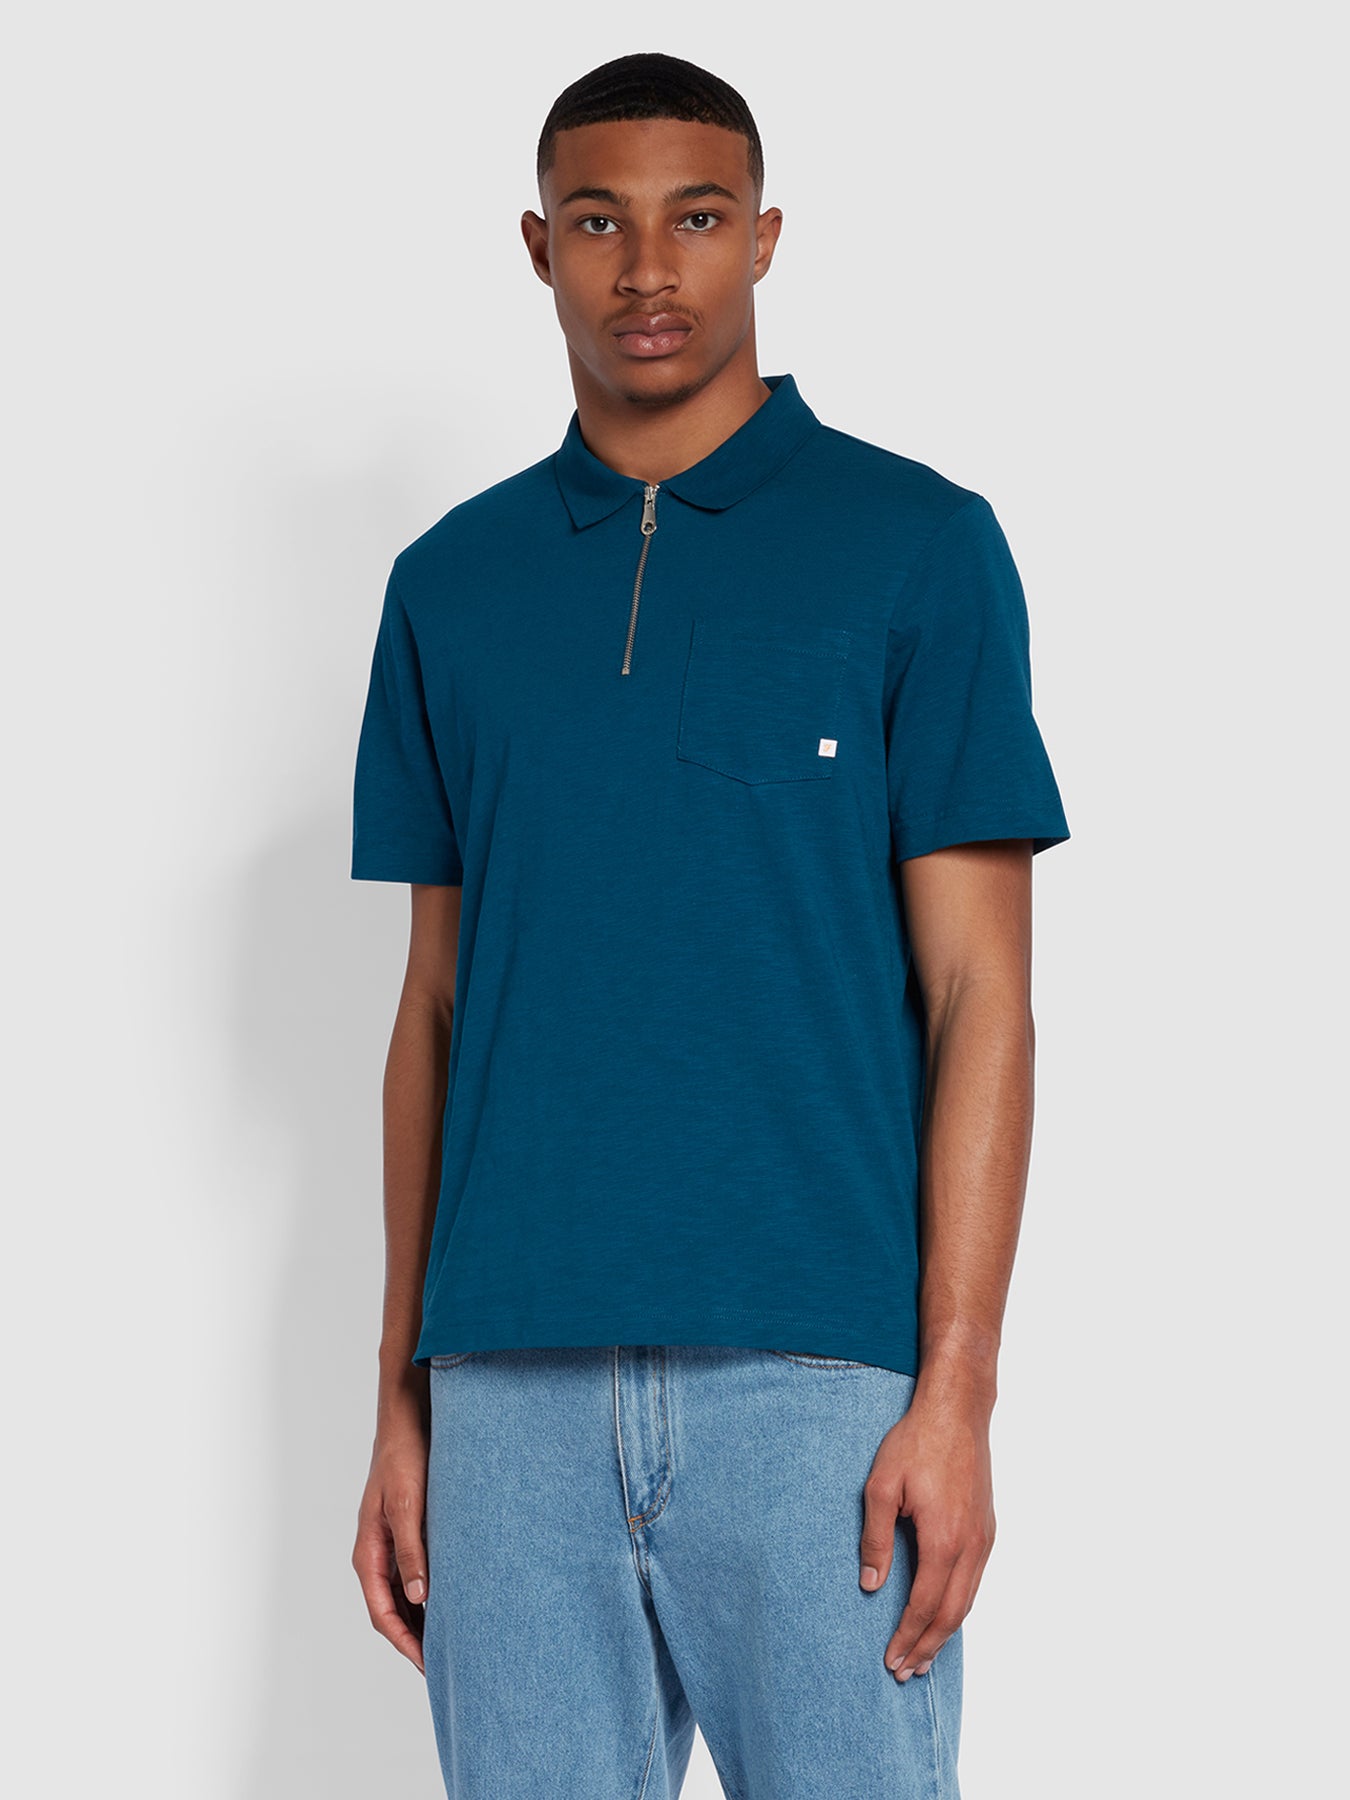 View Chancery Regular Fit Zip Placket Polo Shirt In Sailor Blue information